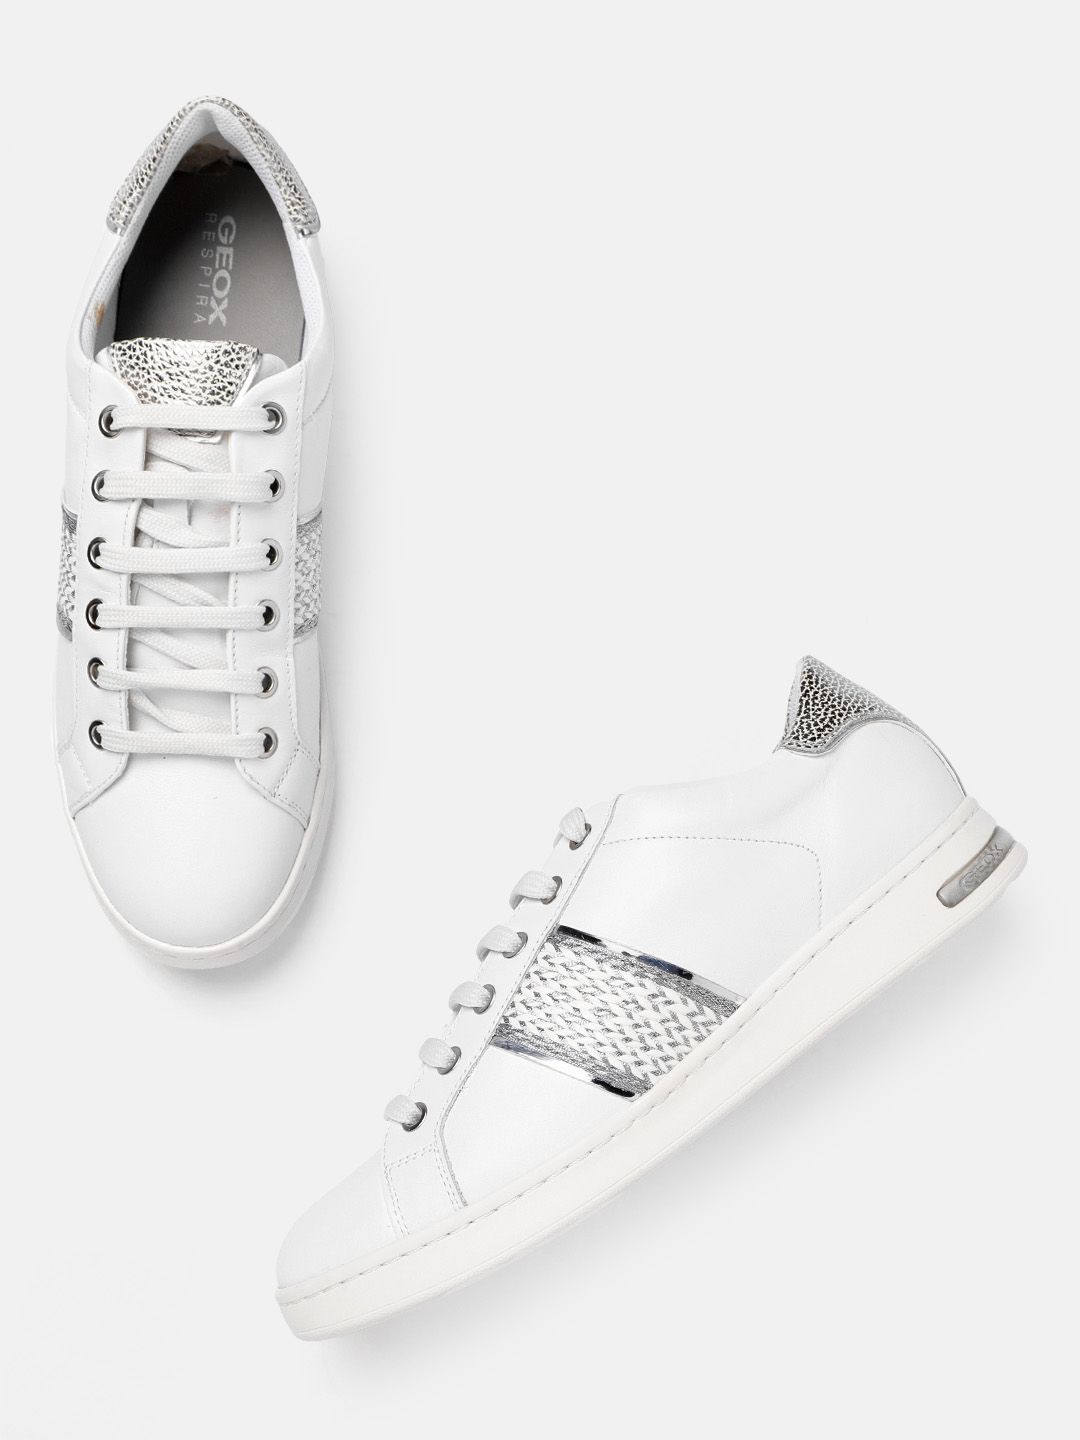 Geox Women White Lightweight Leather Sneakers Price in India